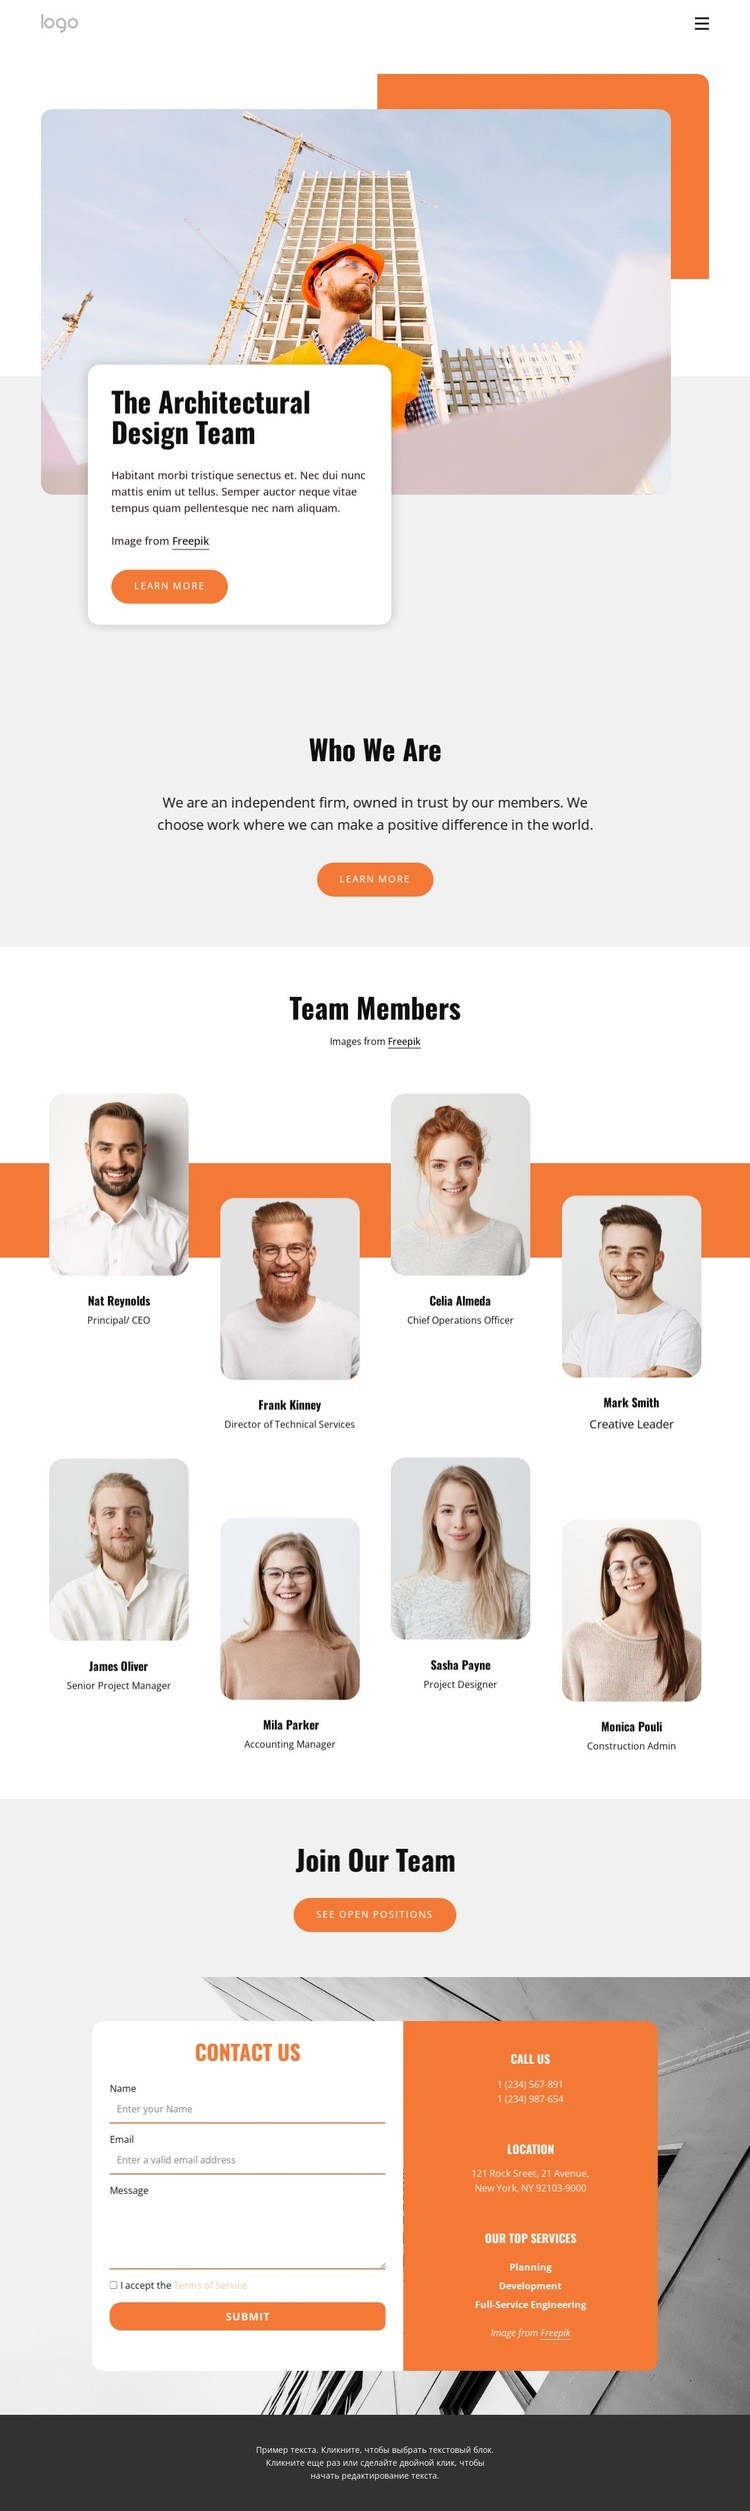 The planning firm with 53 offices and 7000+ professionals Homepage Design